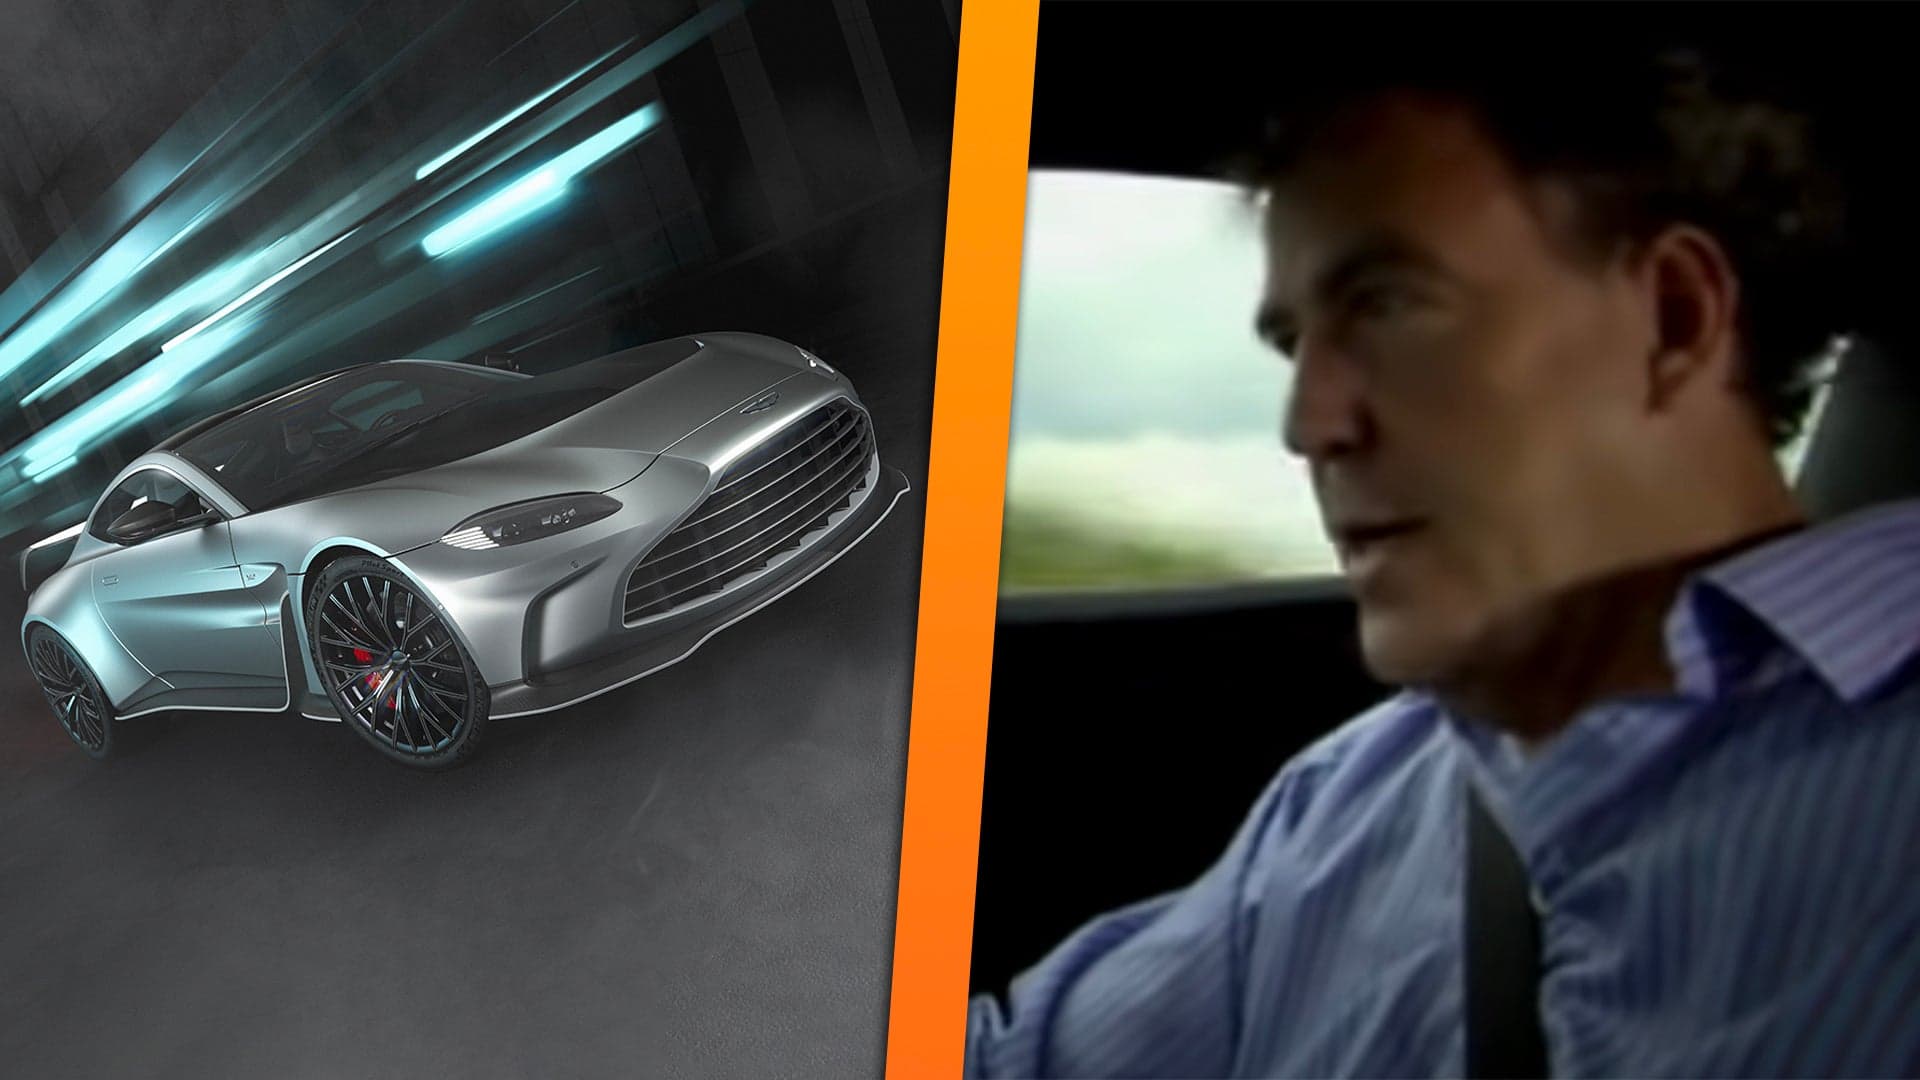 The 2023 Aston Martin V12 Vantage Is Proof of What Jeremy Clarkson Got Wrong